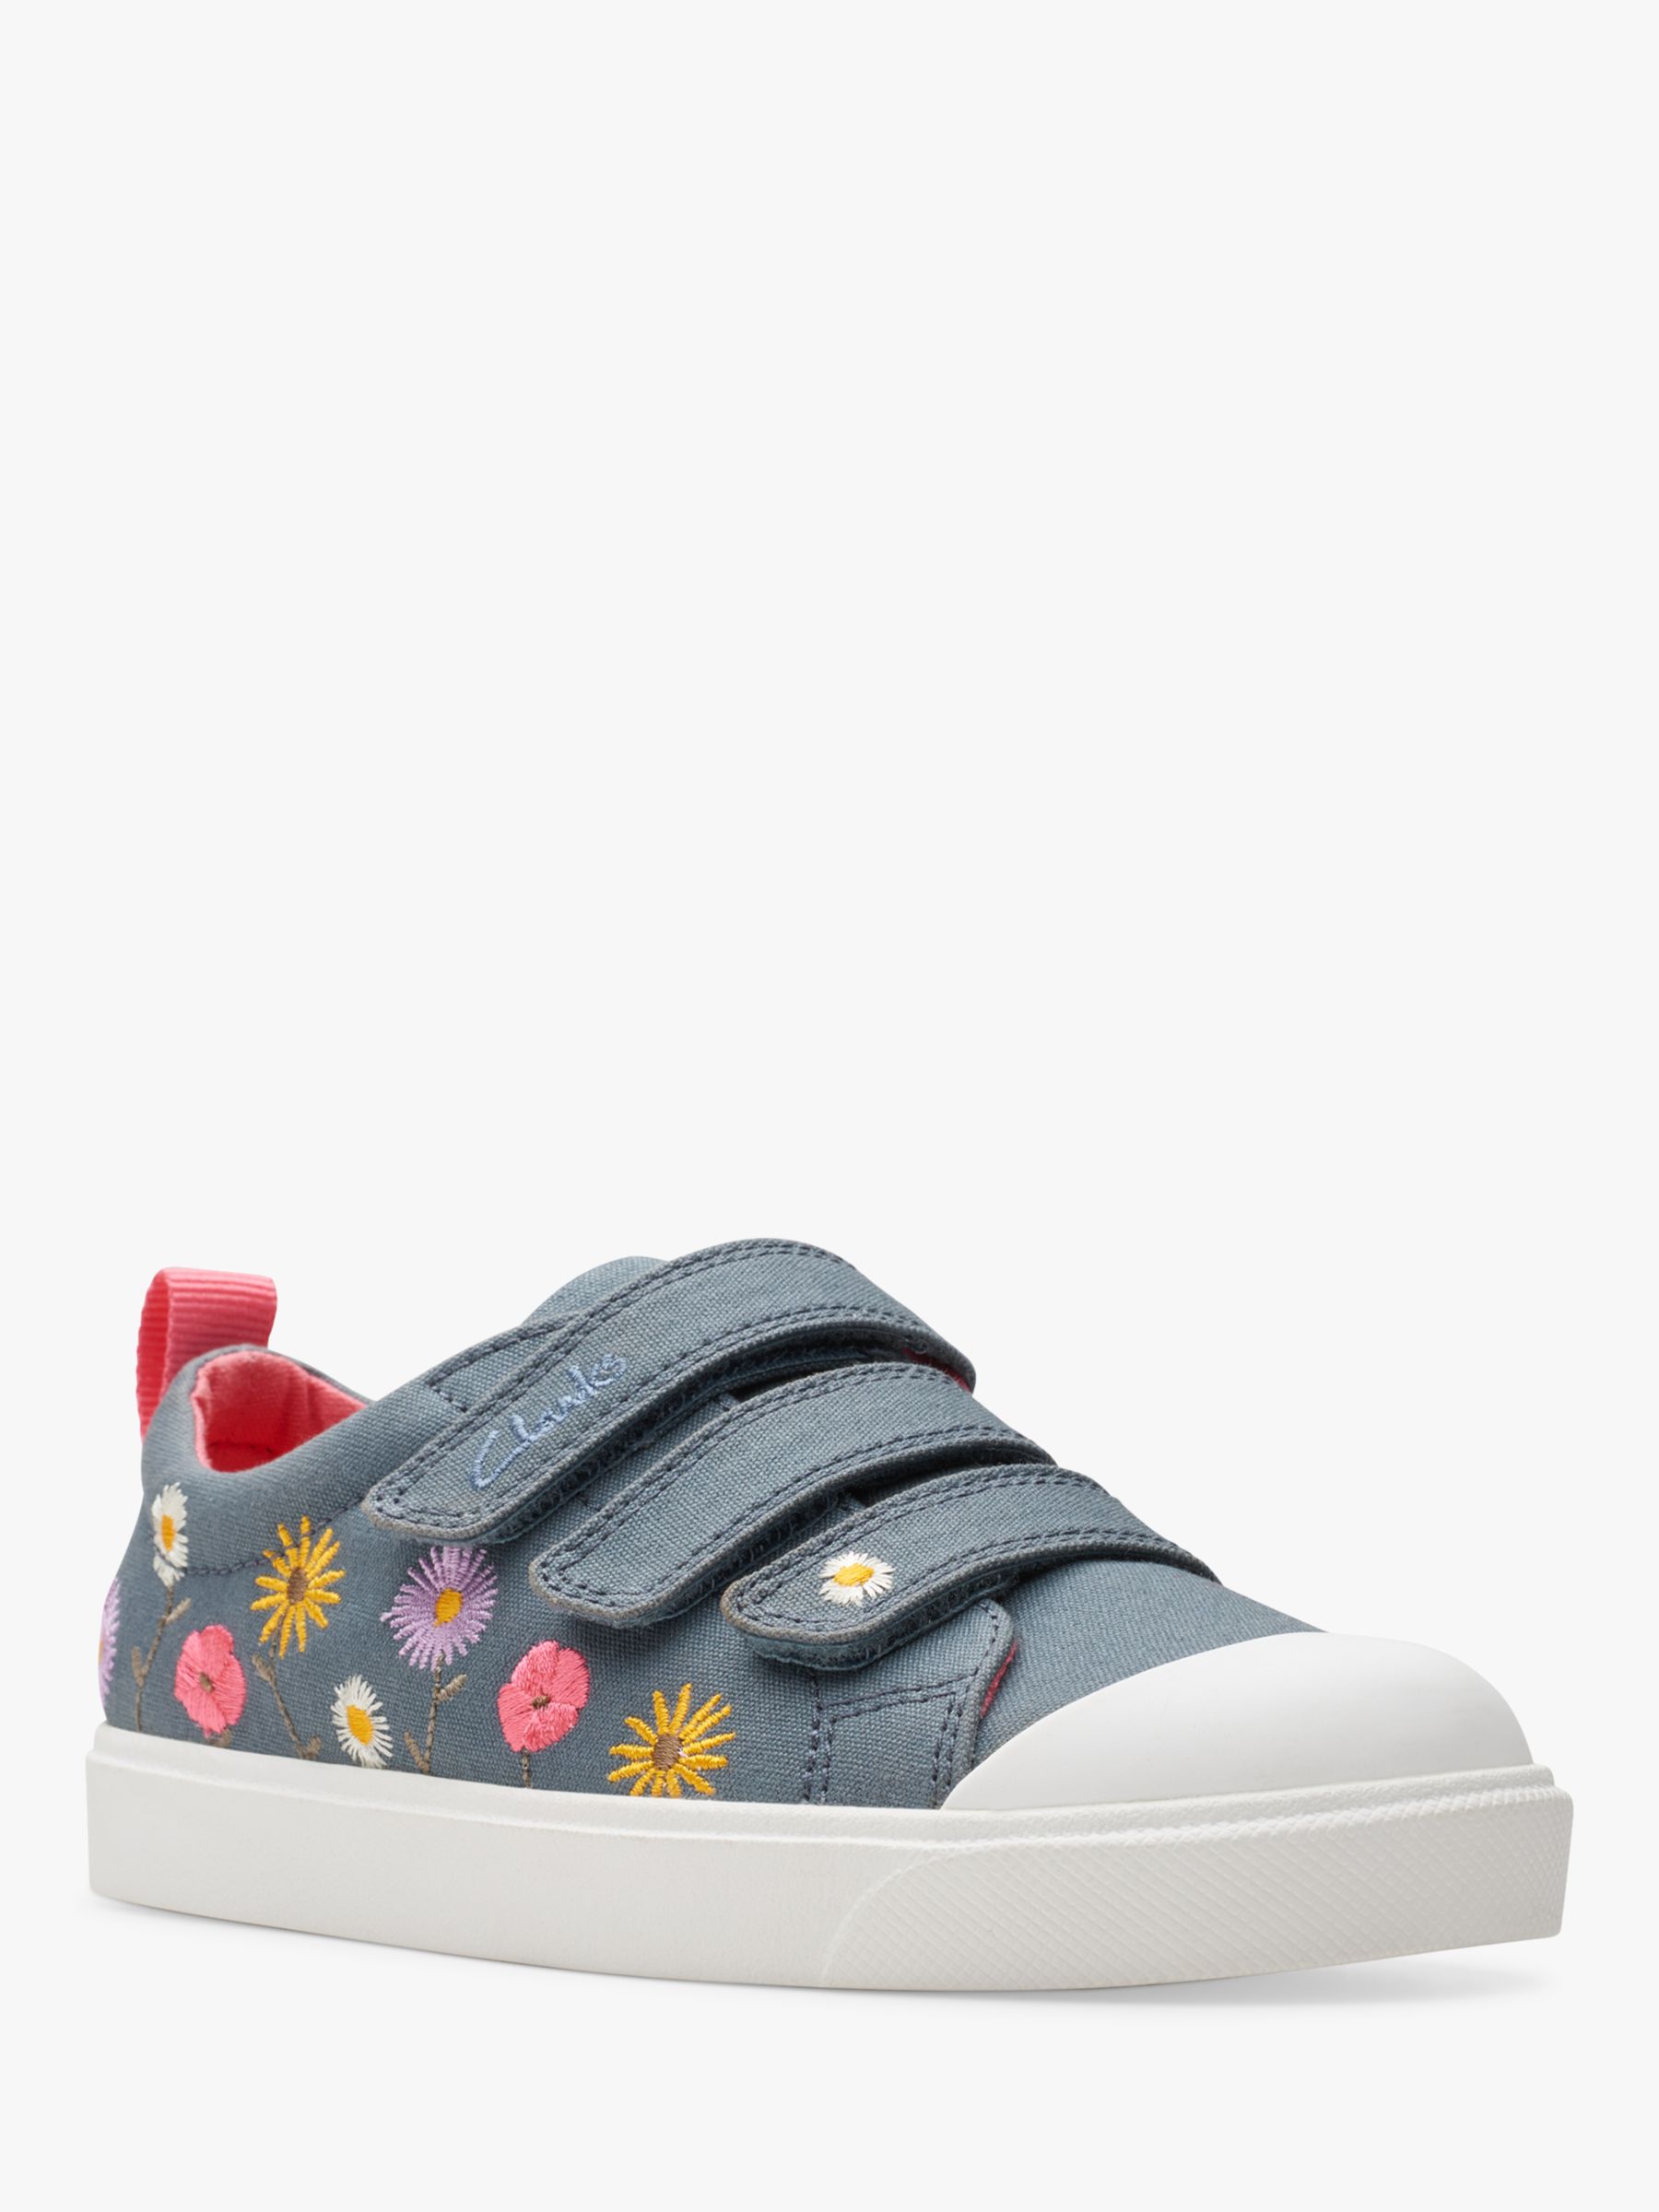 Clarks Kids' City Vibe K Canvas Floral Embroidered Trainers, Blue, 9.5G Jnr